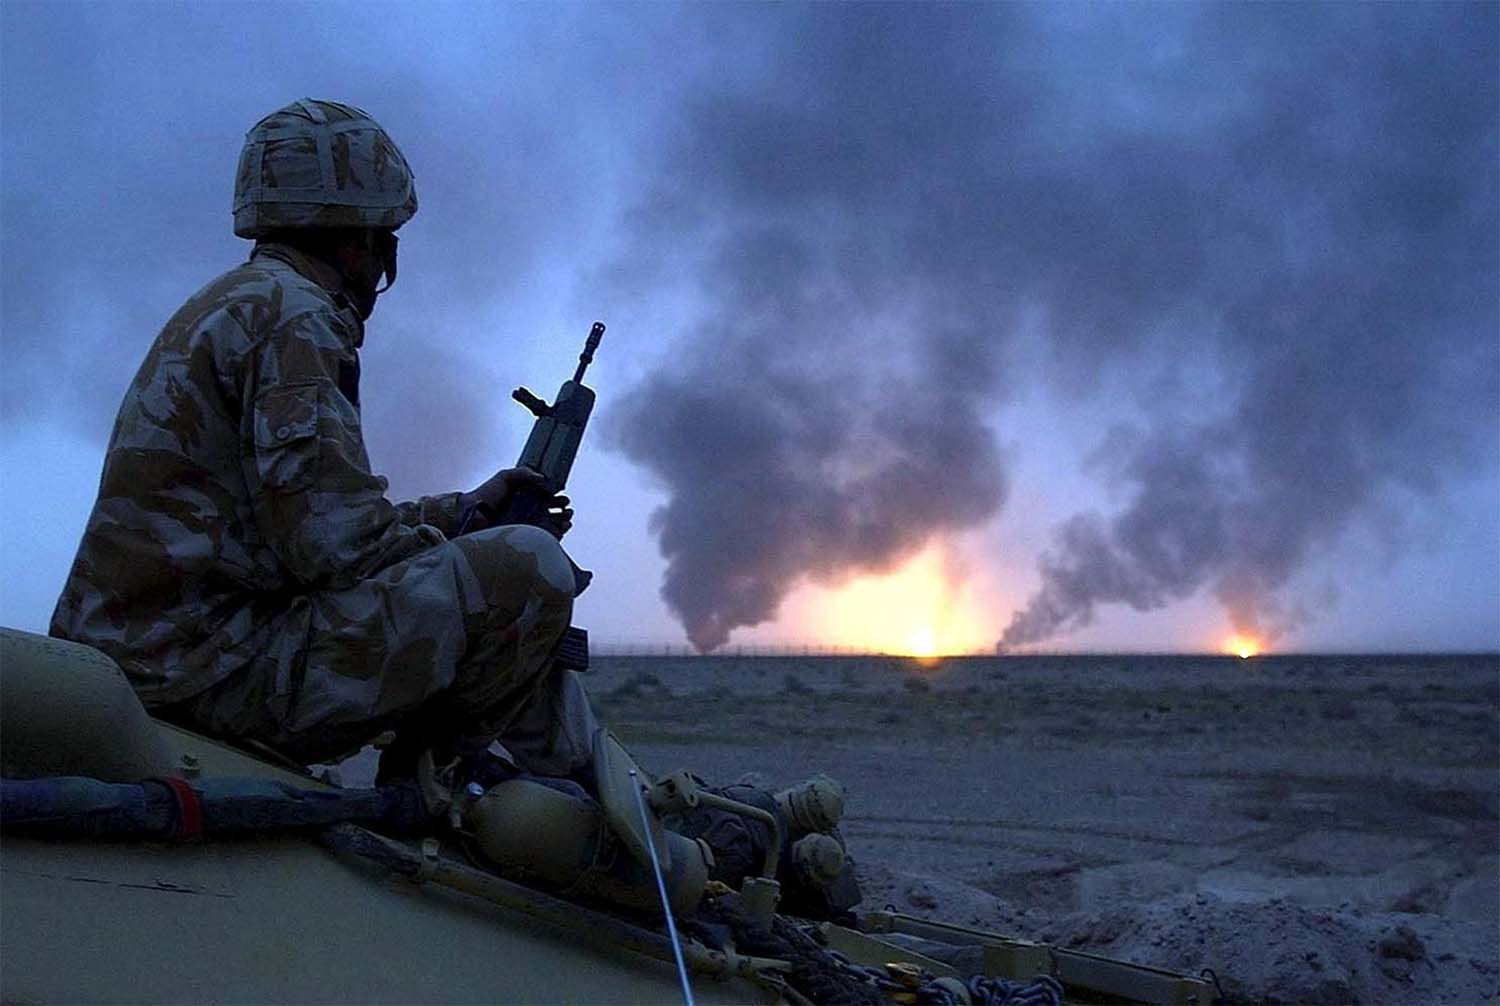 British soldier watching burning oil wells in southern Iraq on March 20, 2003 during US-led invasion of Iraq 